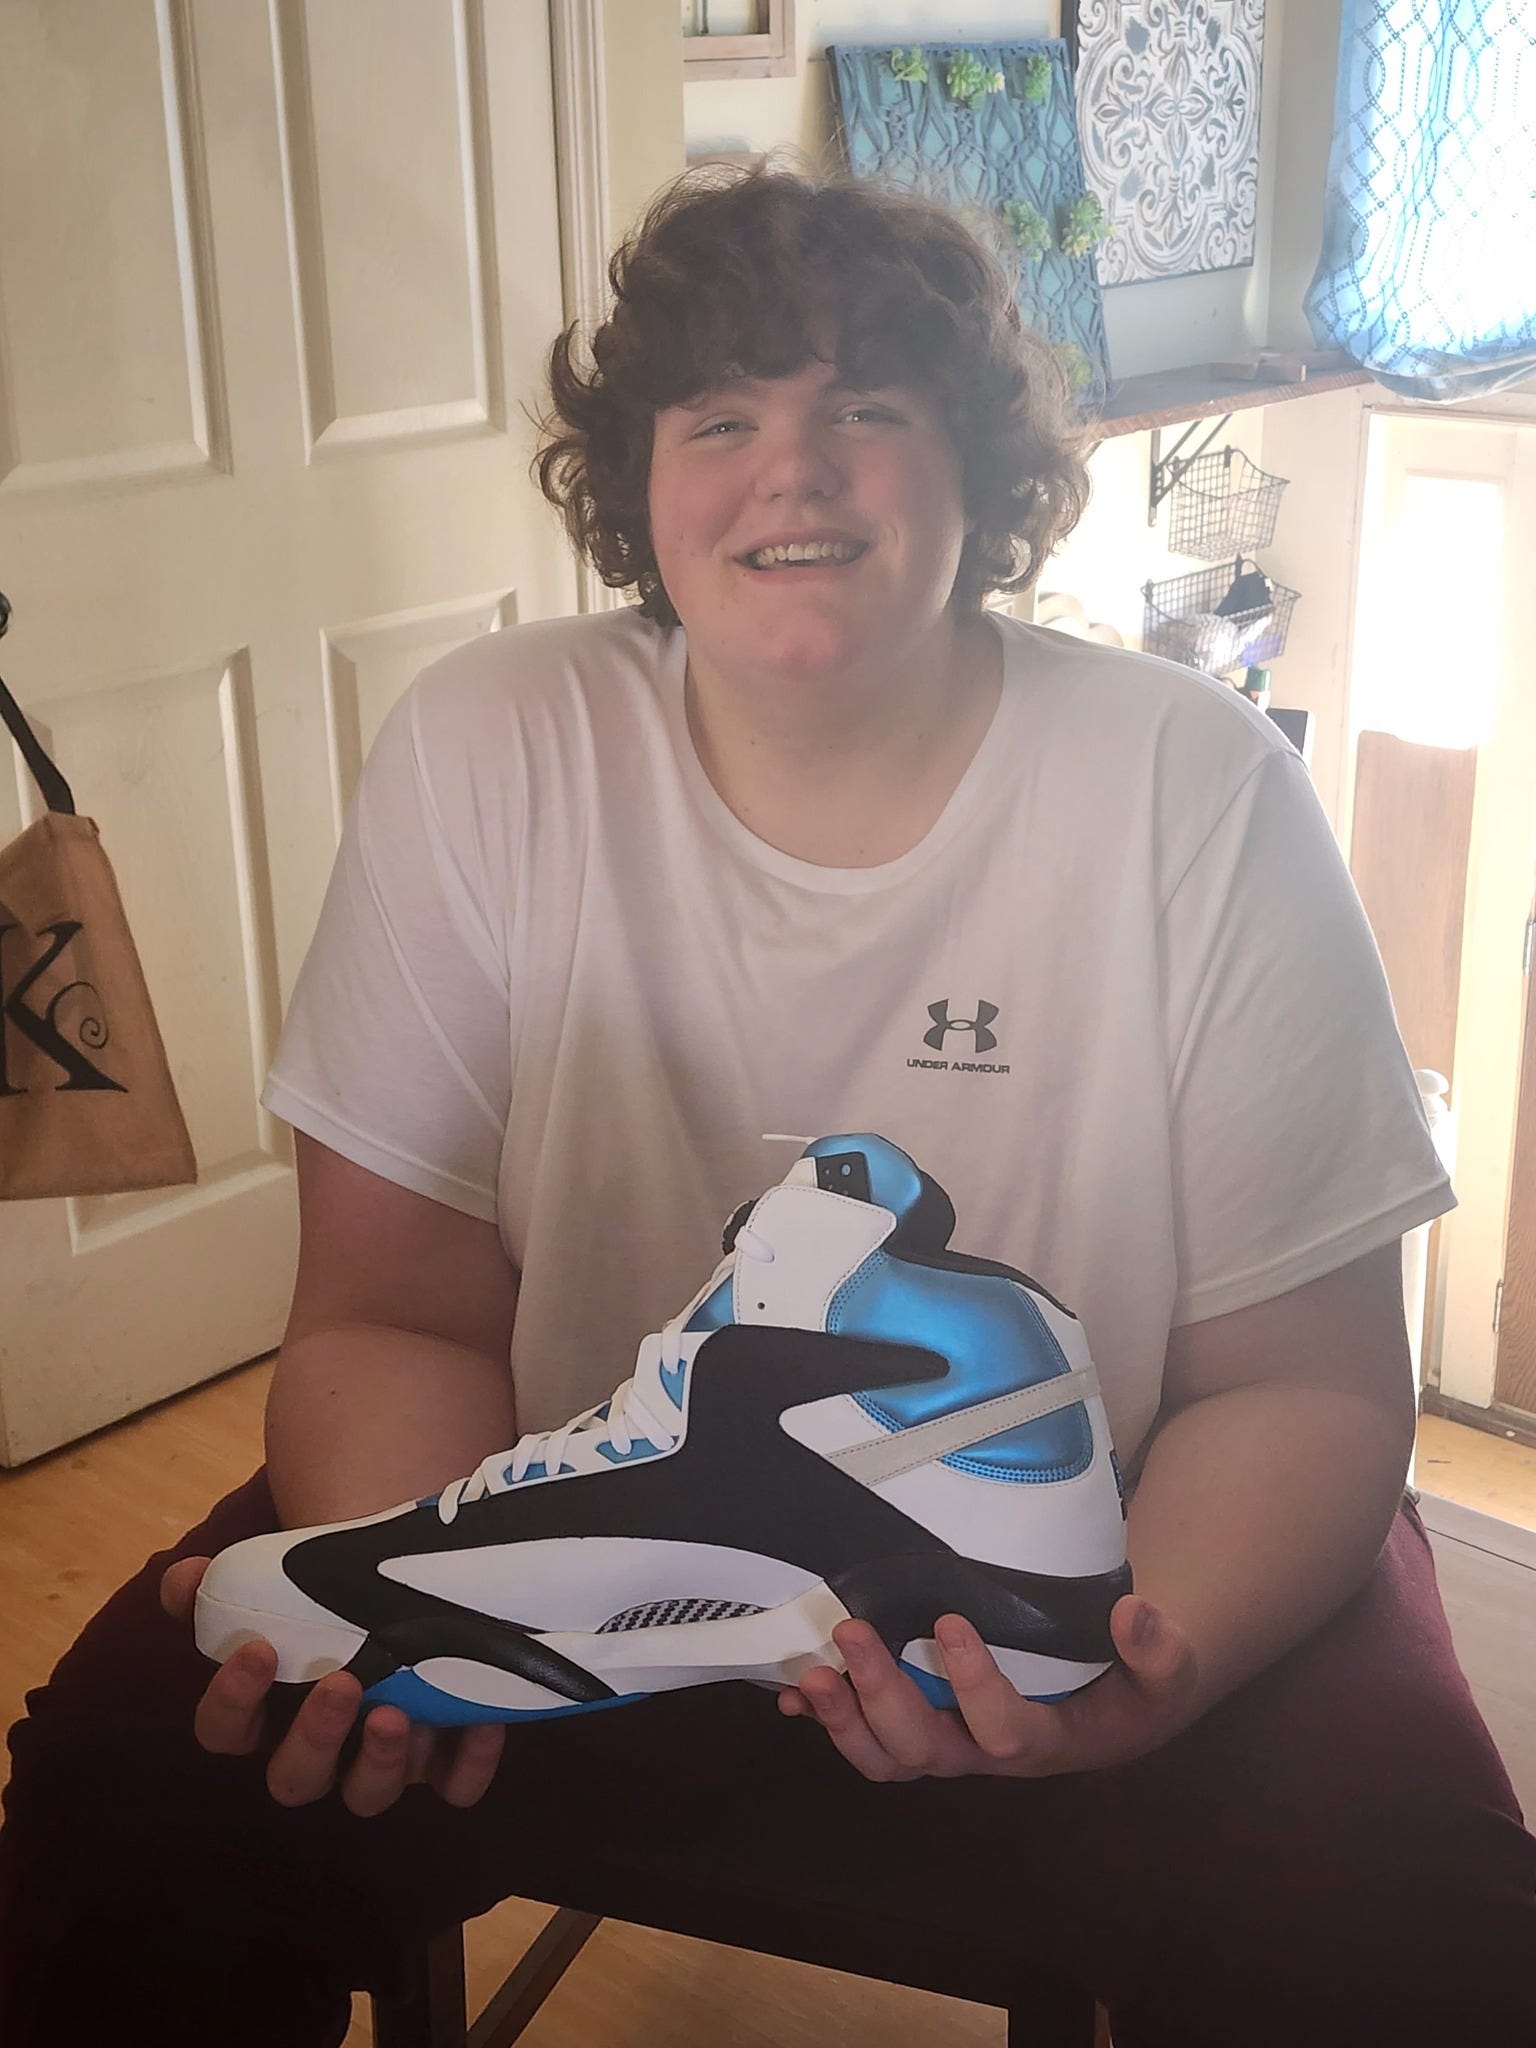 Shaq's phone call is icing on Eric Kilburn's dream of size 23 shoes